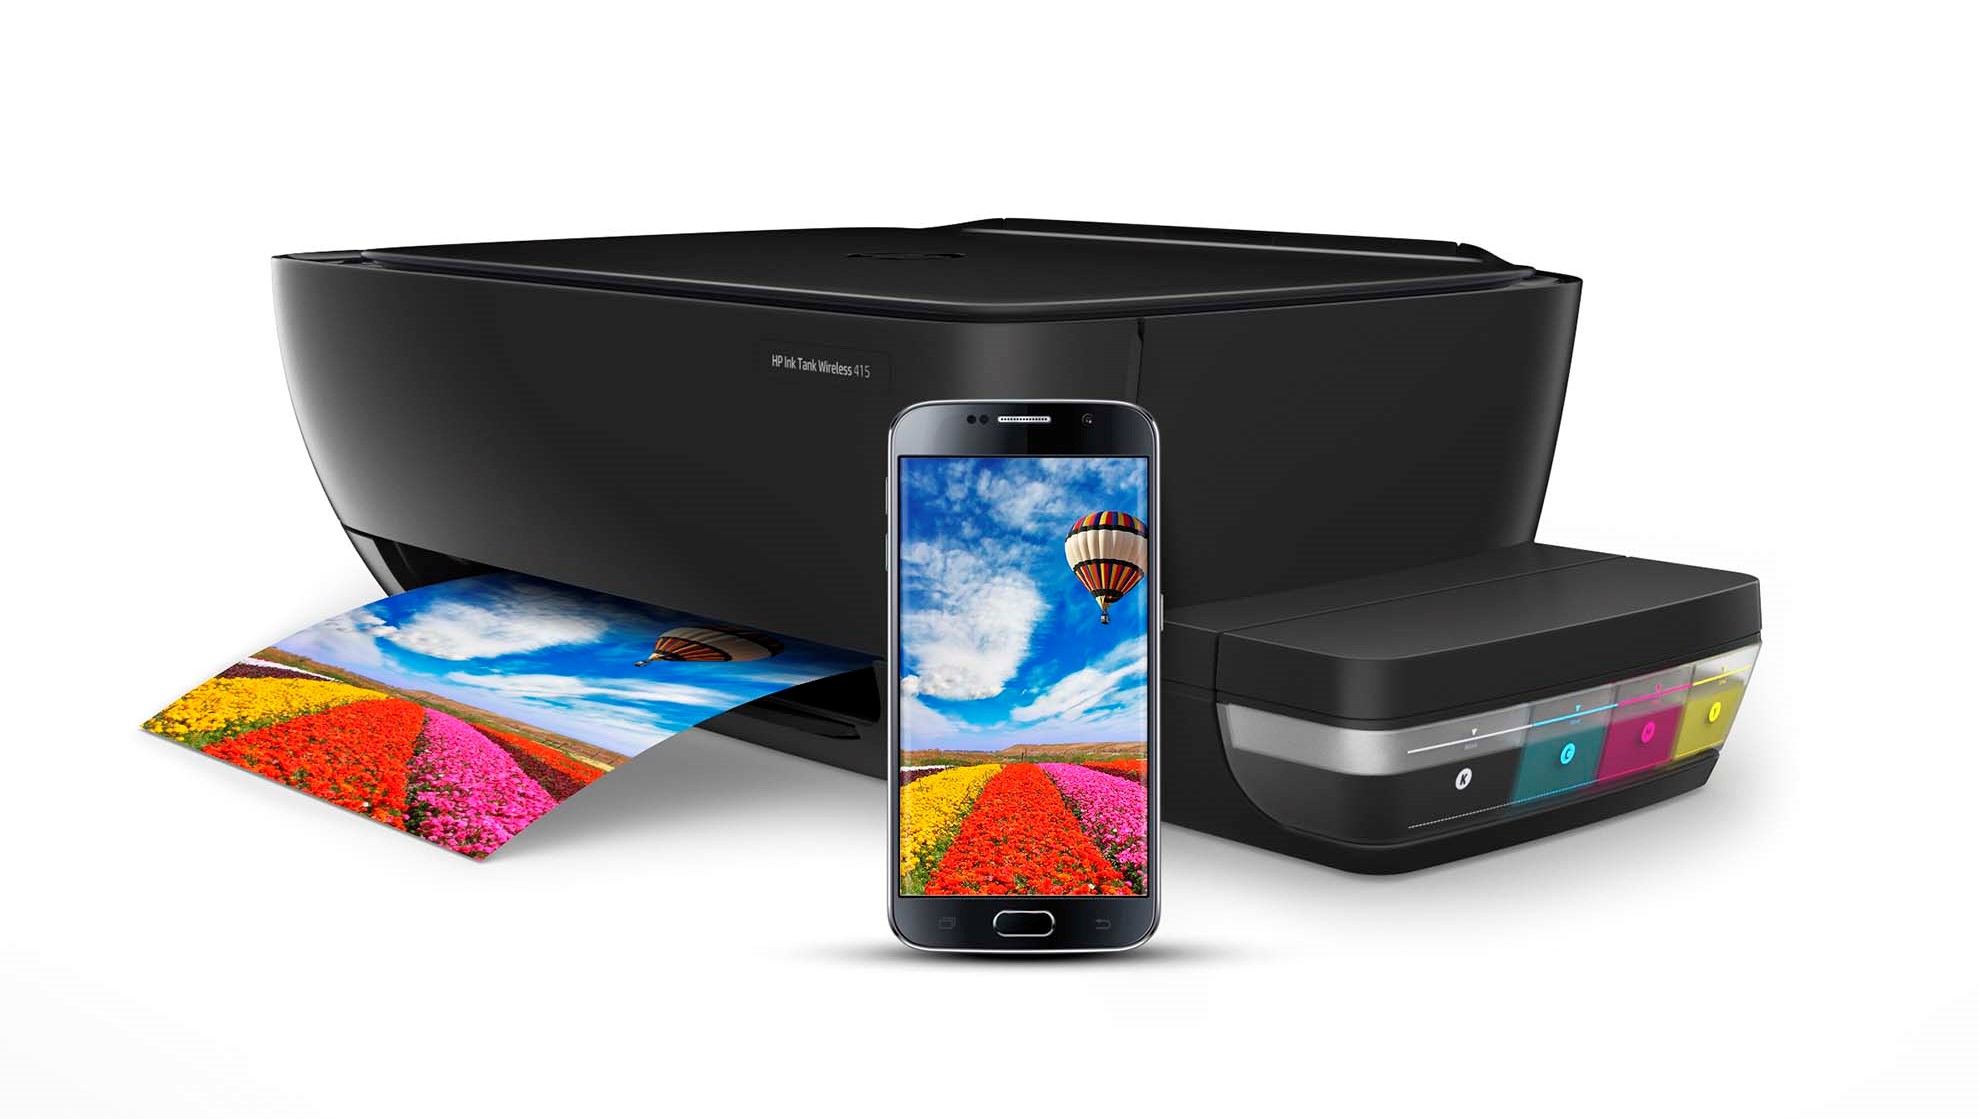 HP Ink Tank Wireless 415 All in One Printer